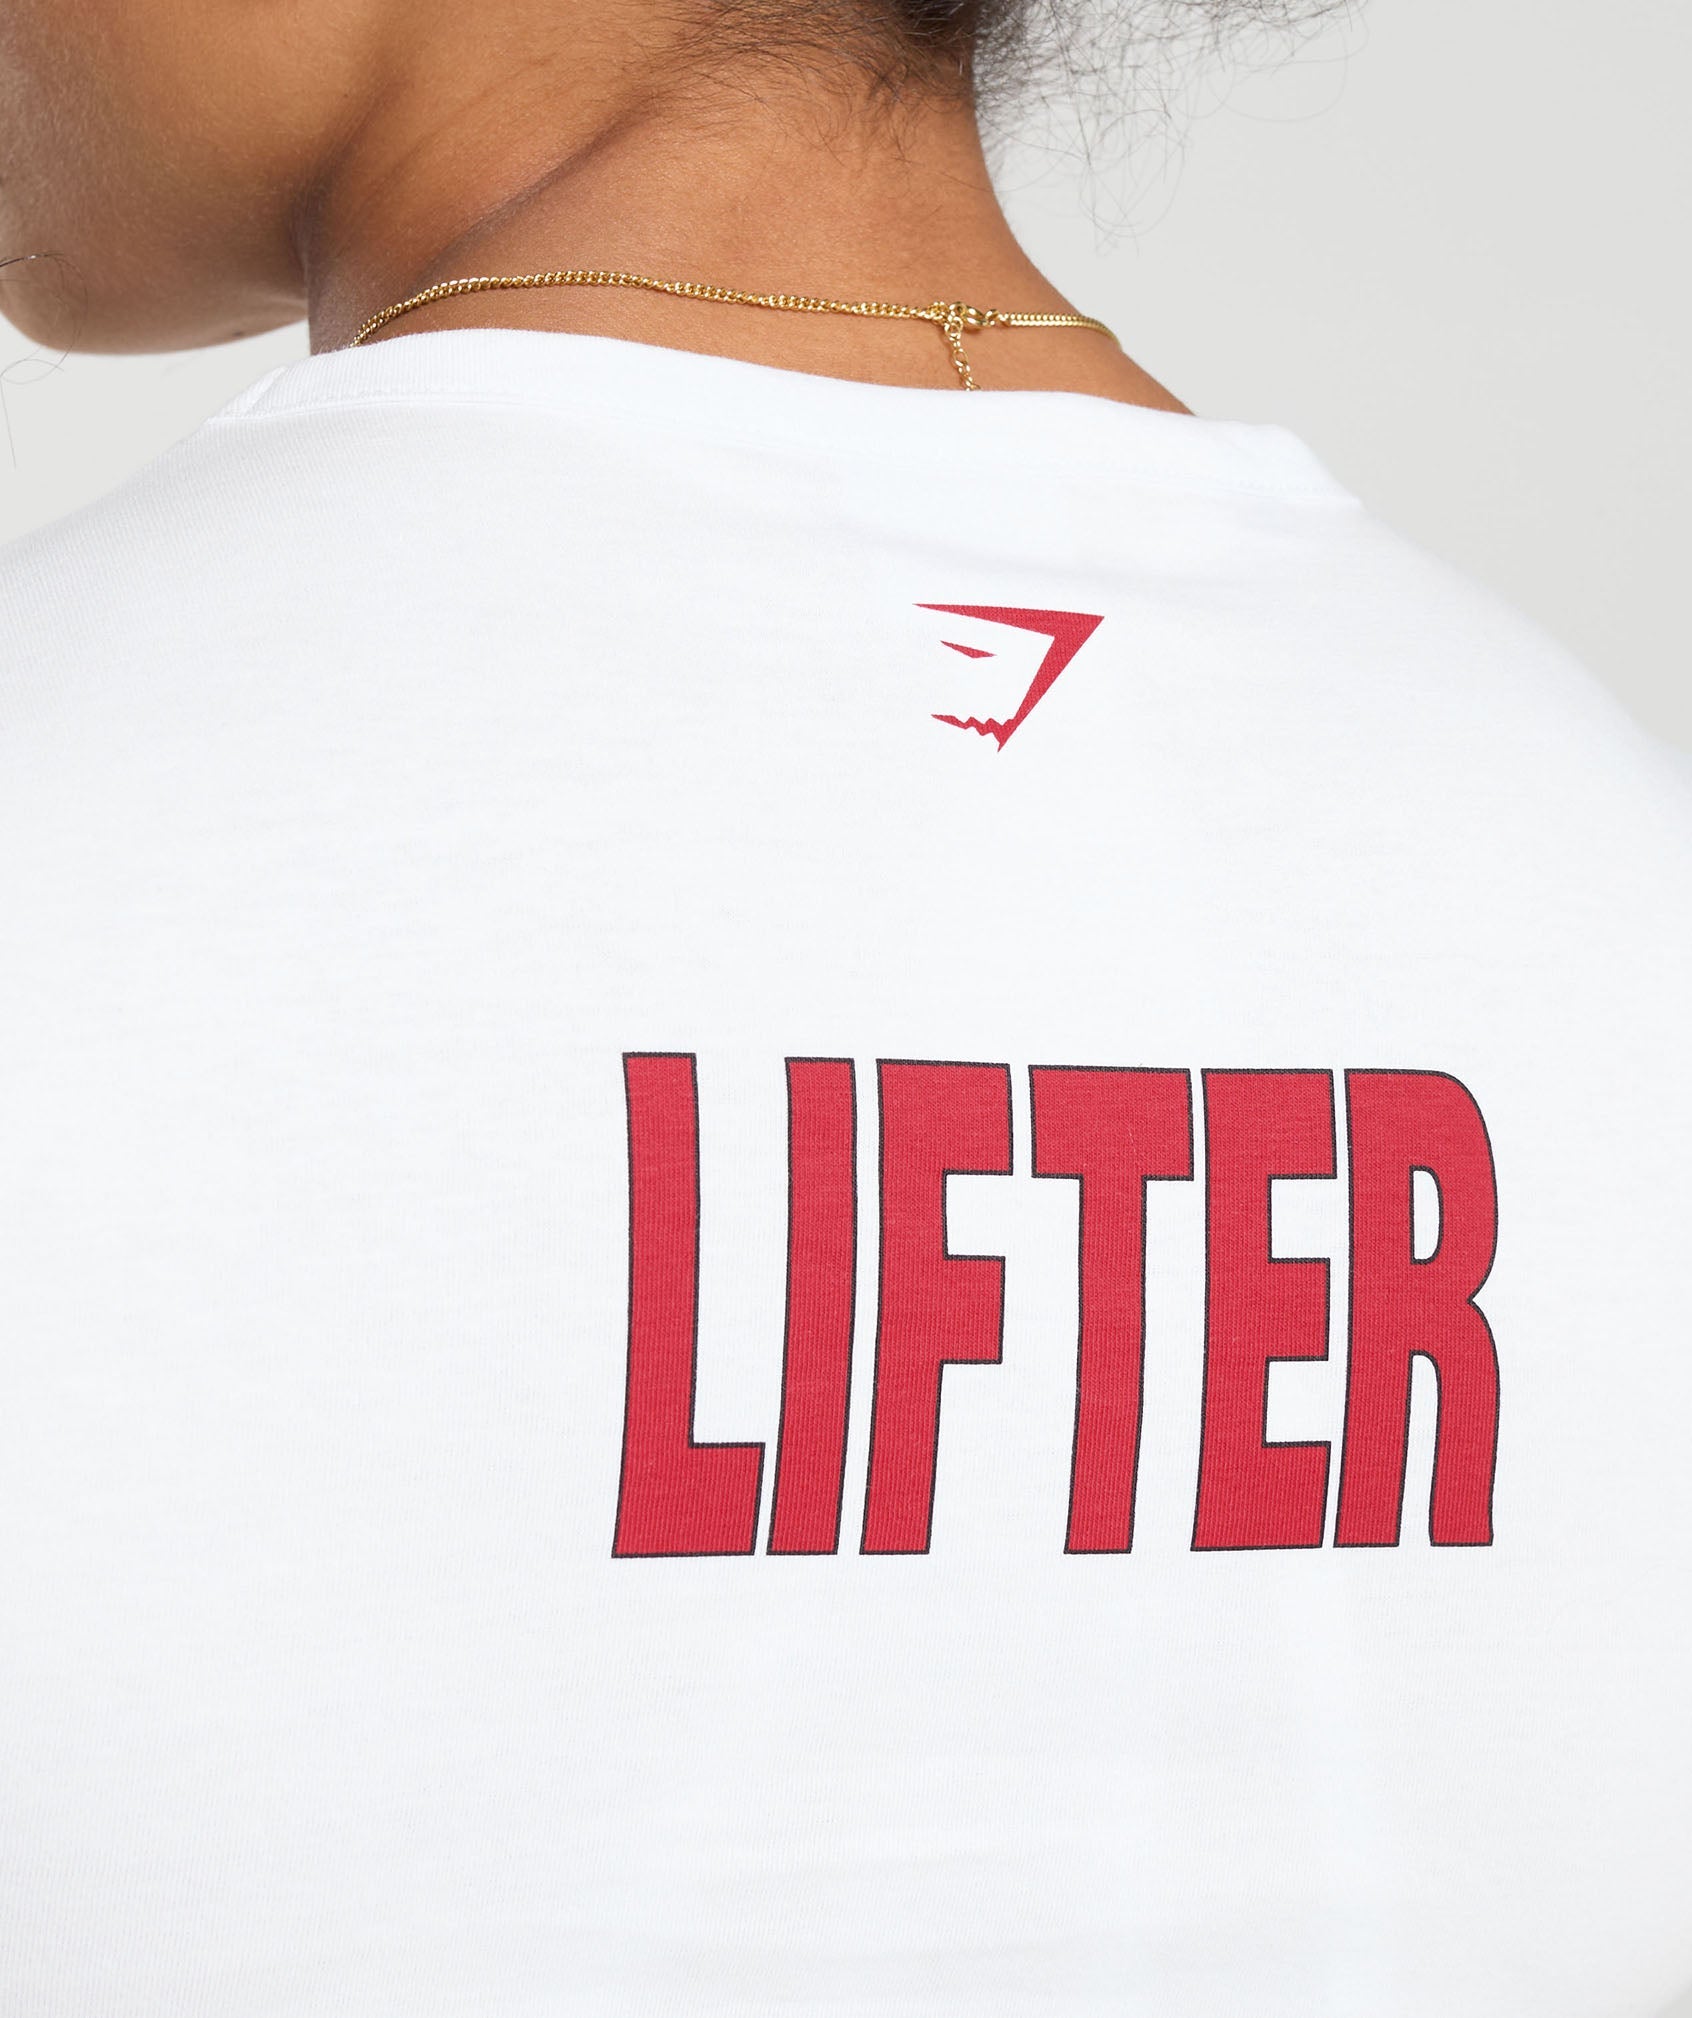 Strong Lifter Baby Tee in White - view 6